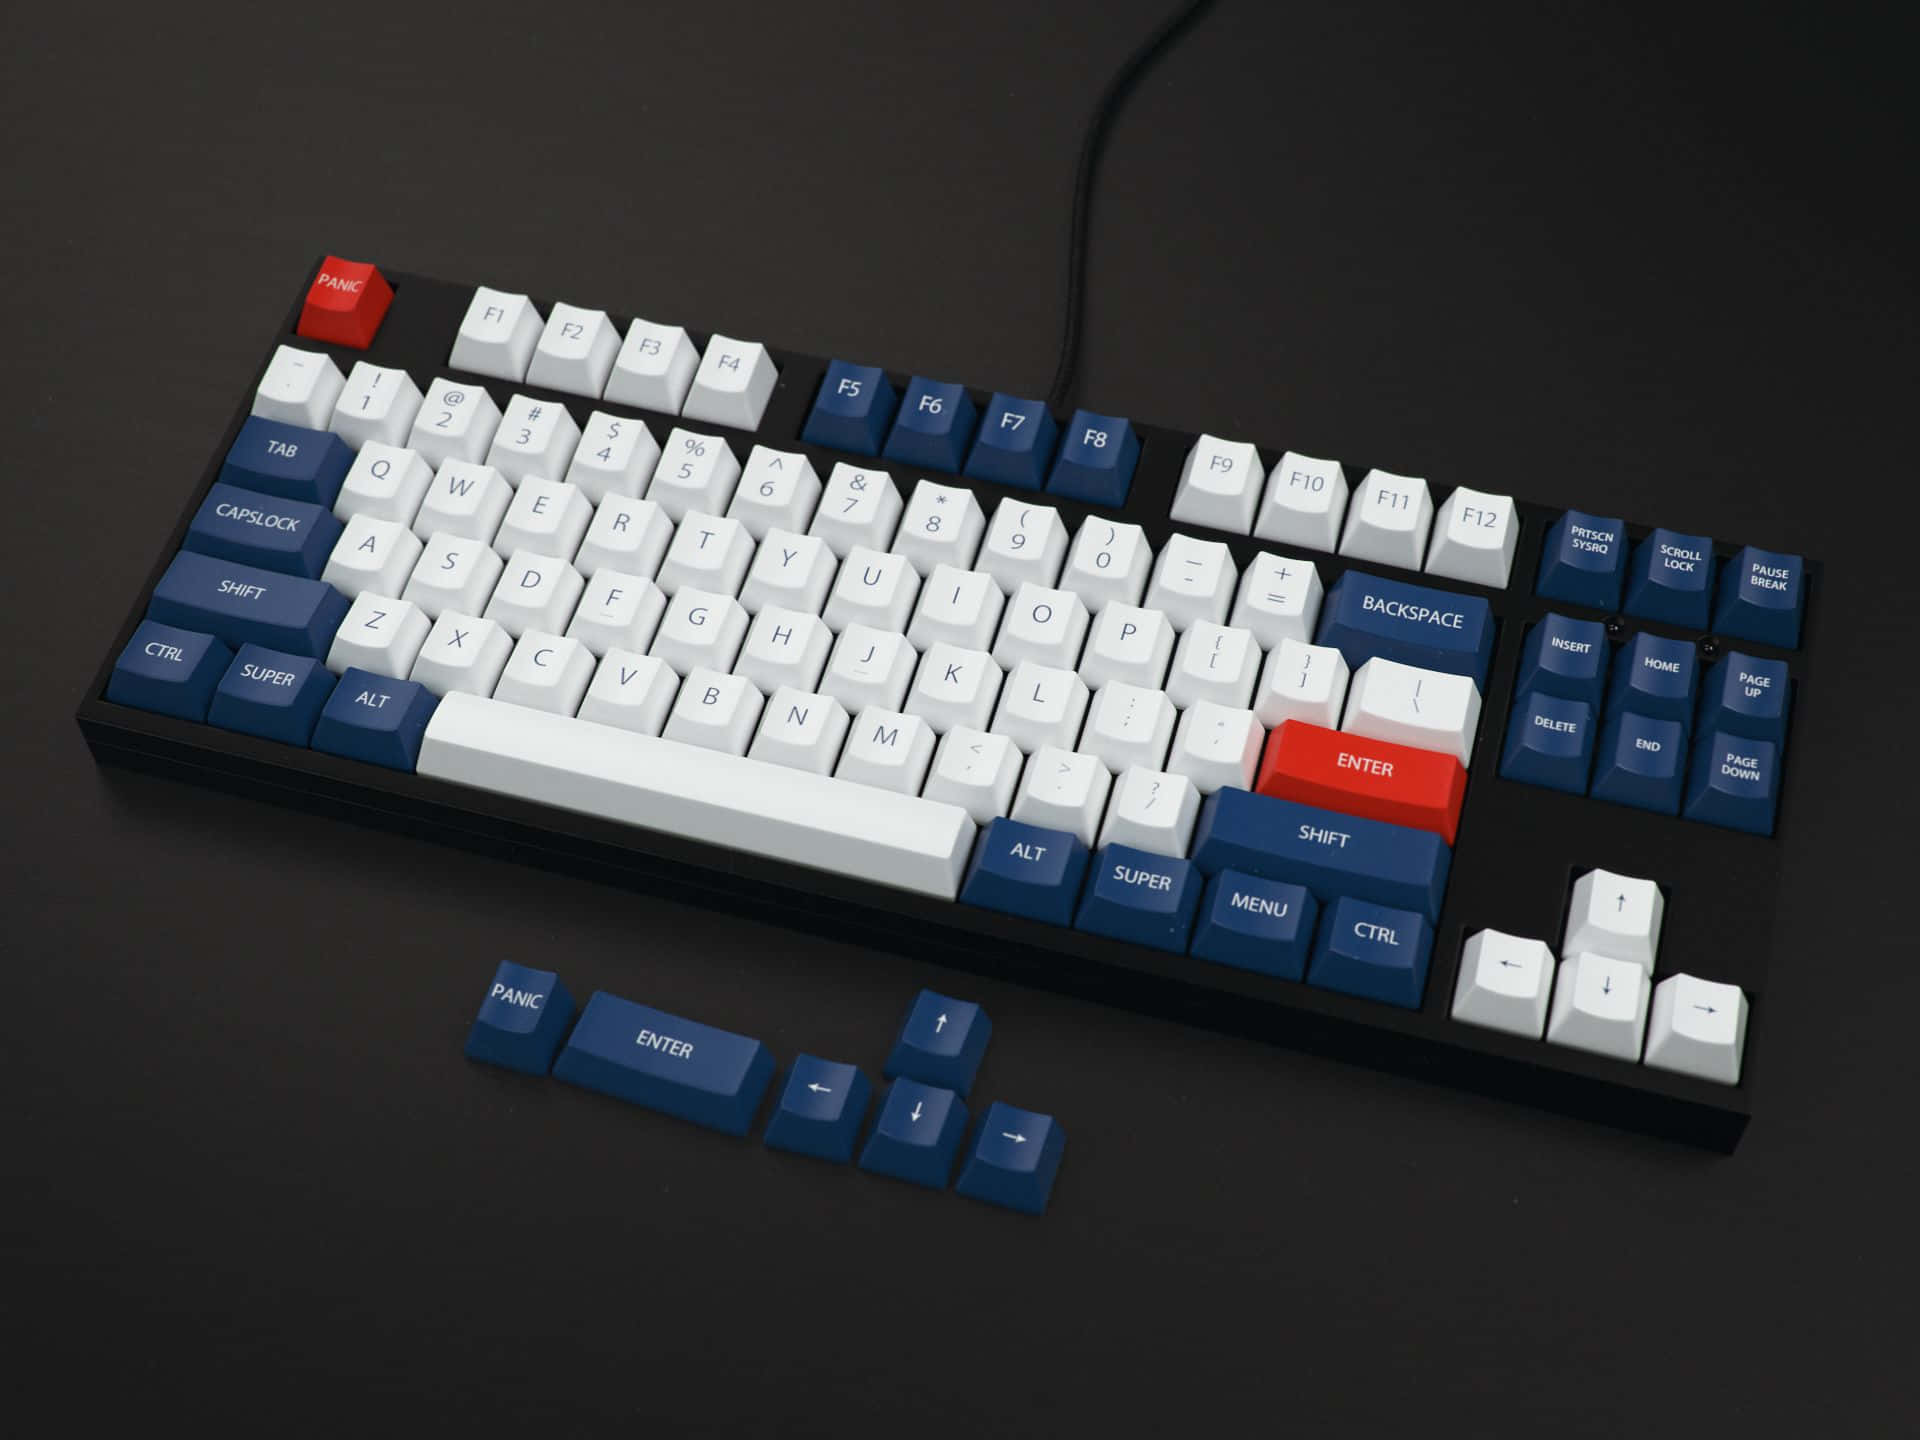 A Blue And White Keyboard With A Red And Blue Key